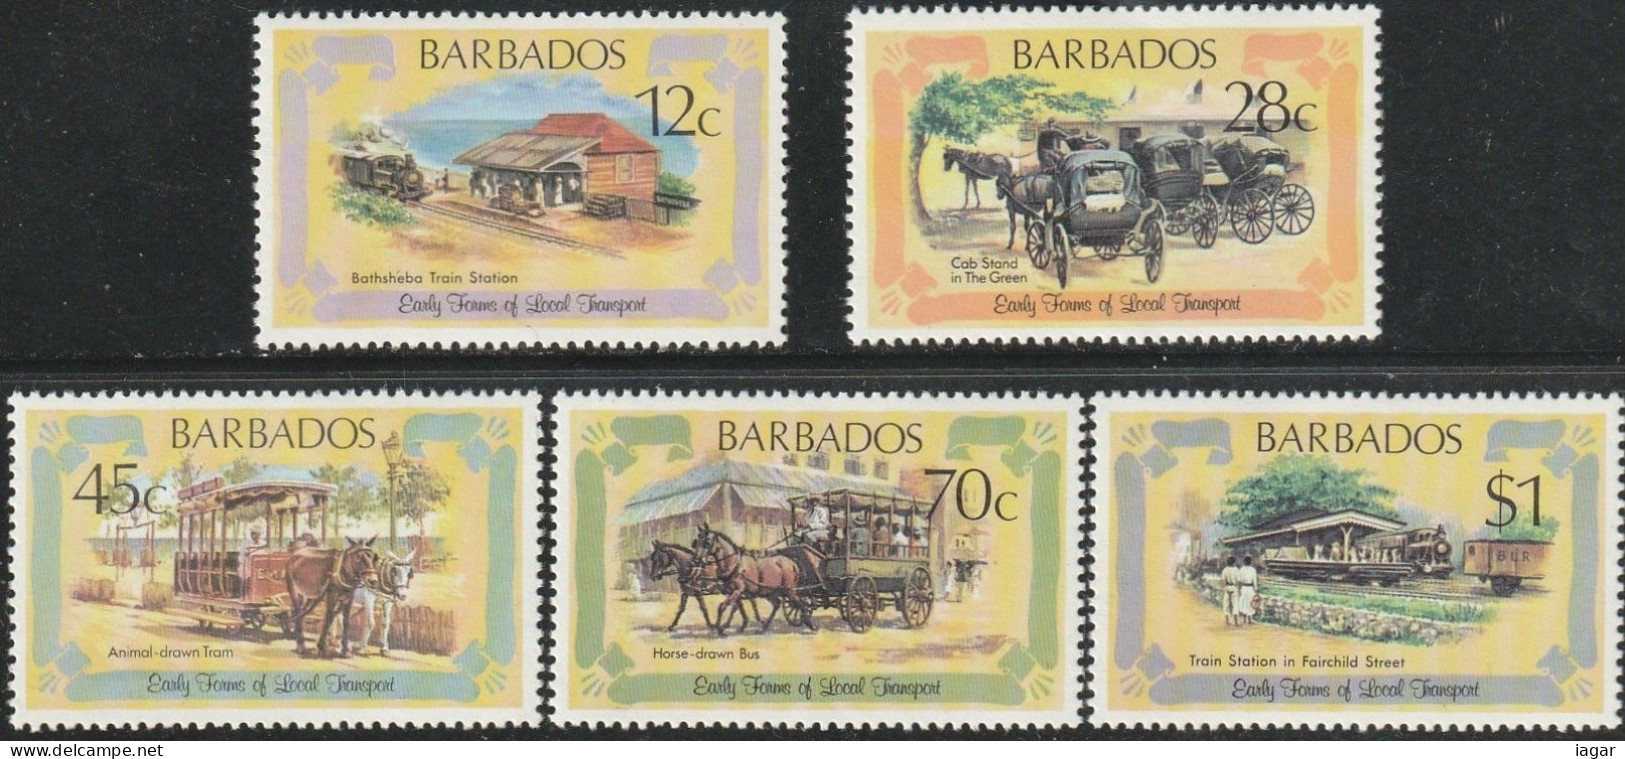 THEMATIC TRANSPORTS: EARLY TRANSPORTS. RAILWAY STATION, CAB STAND, ANIMAL-DRAWN TRAM, HORSE-DRAWN BUS     -   BARBADOS - Other (Earth)